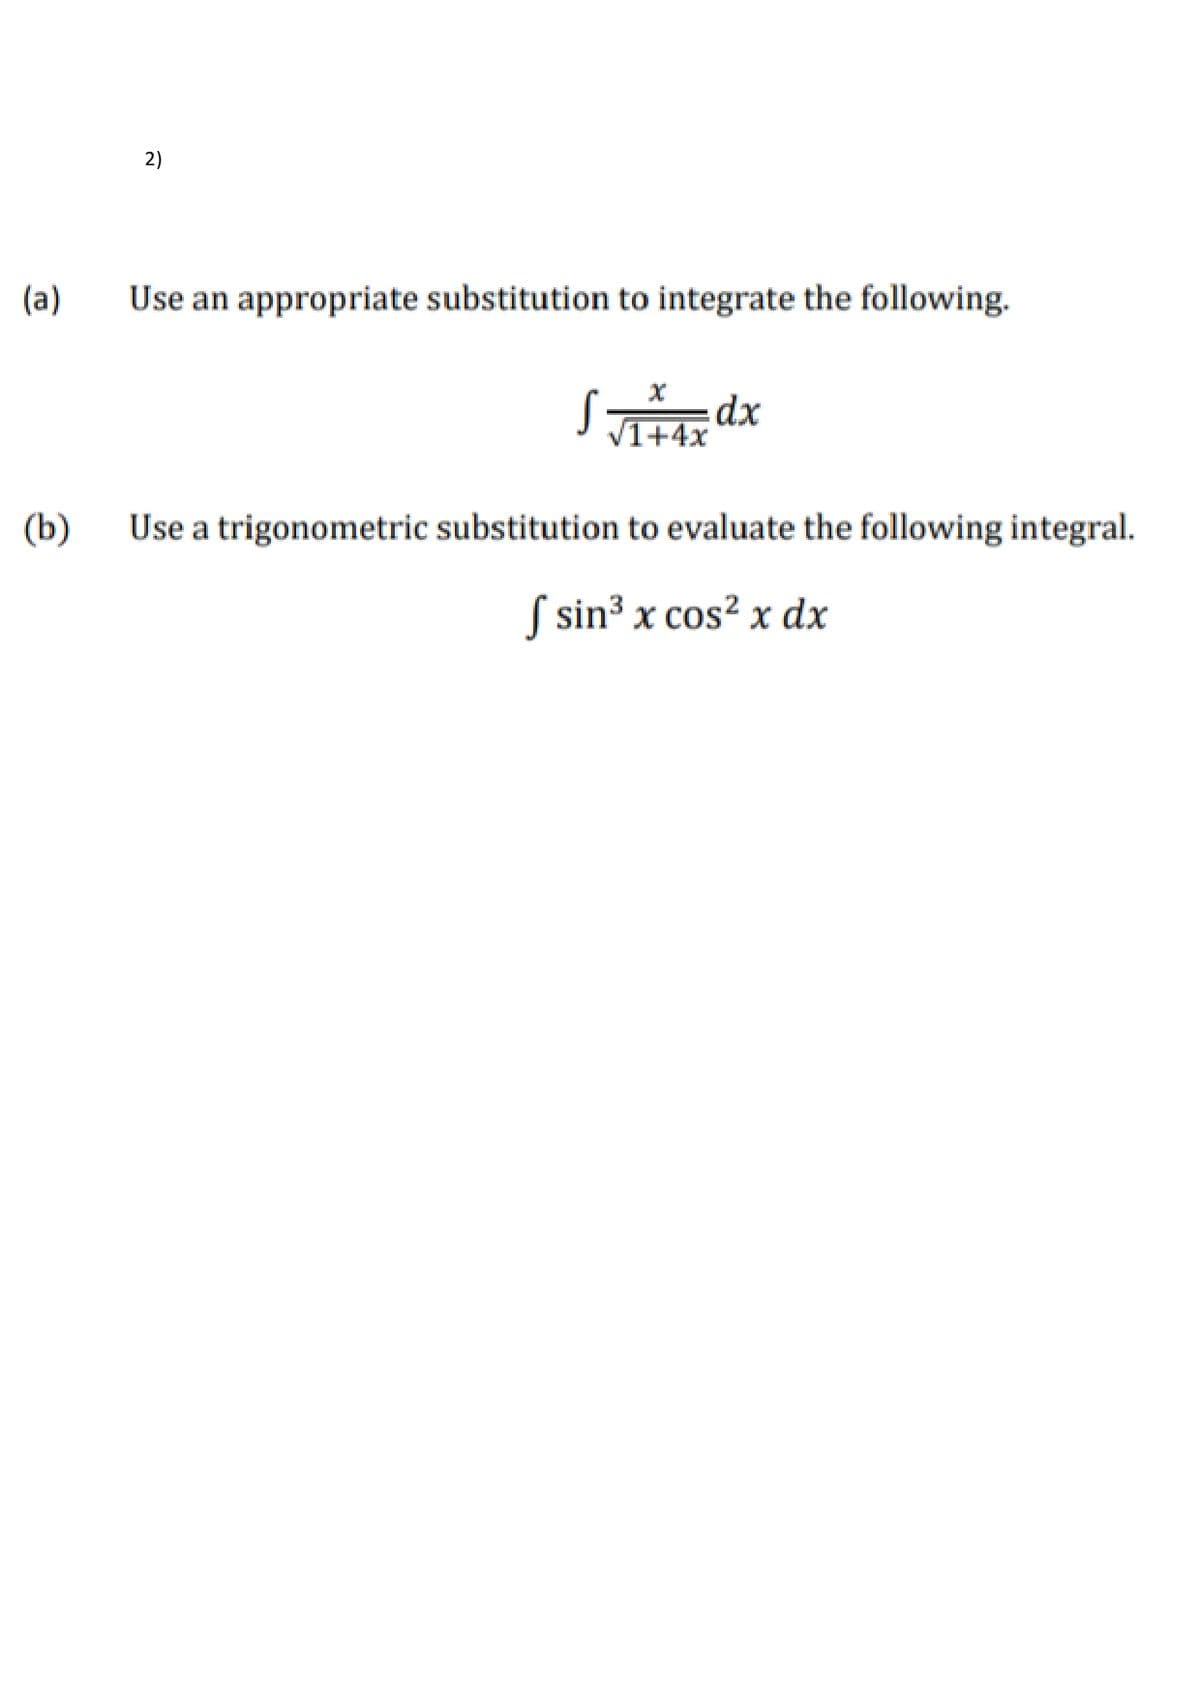 2)
(a)
Use an appropriate substitution to integrate the following.
S dx
VI+4x
(b)
Use a trigonometric substitution to evaluate the following integral.
S sin3 x cos? x dx
